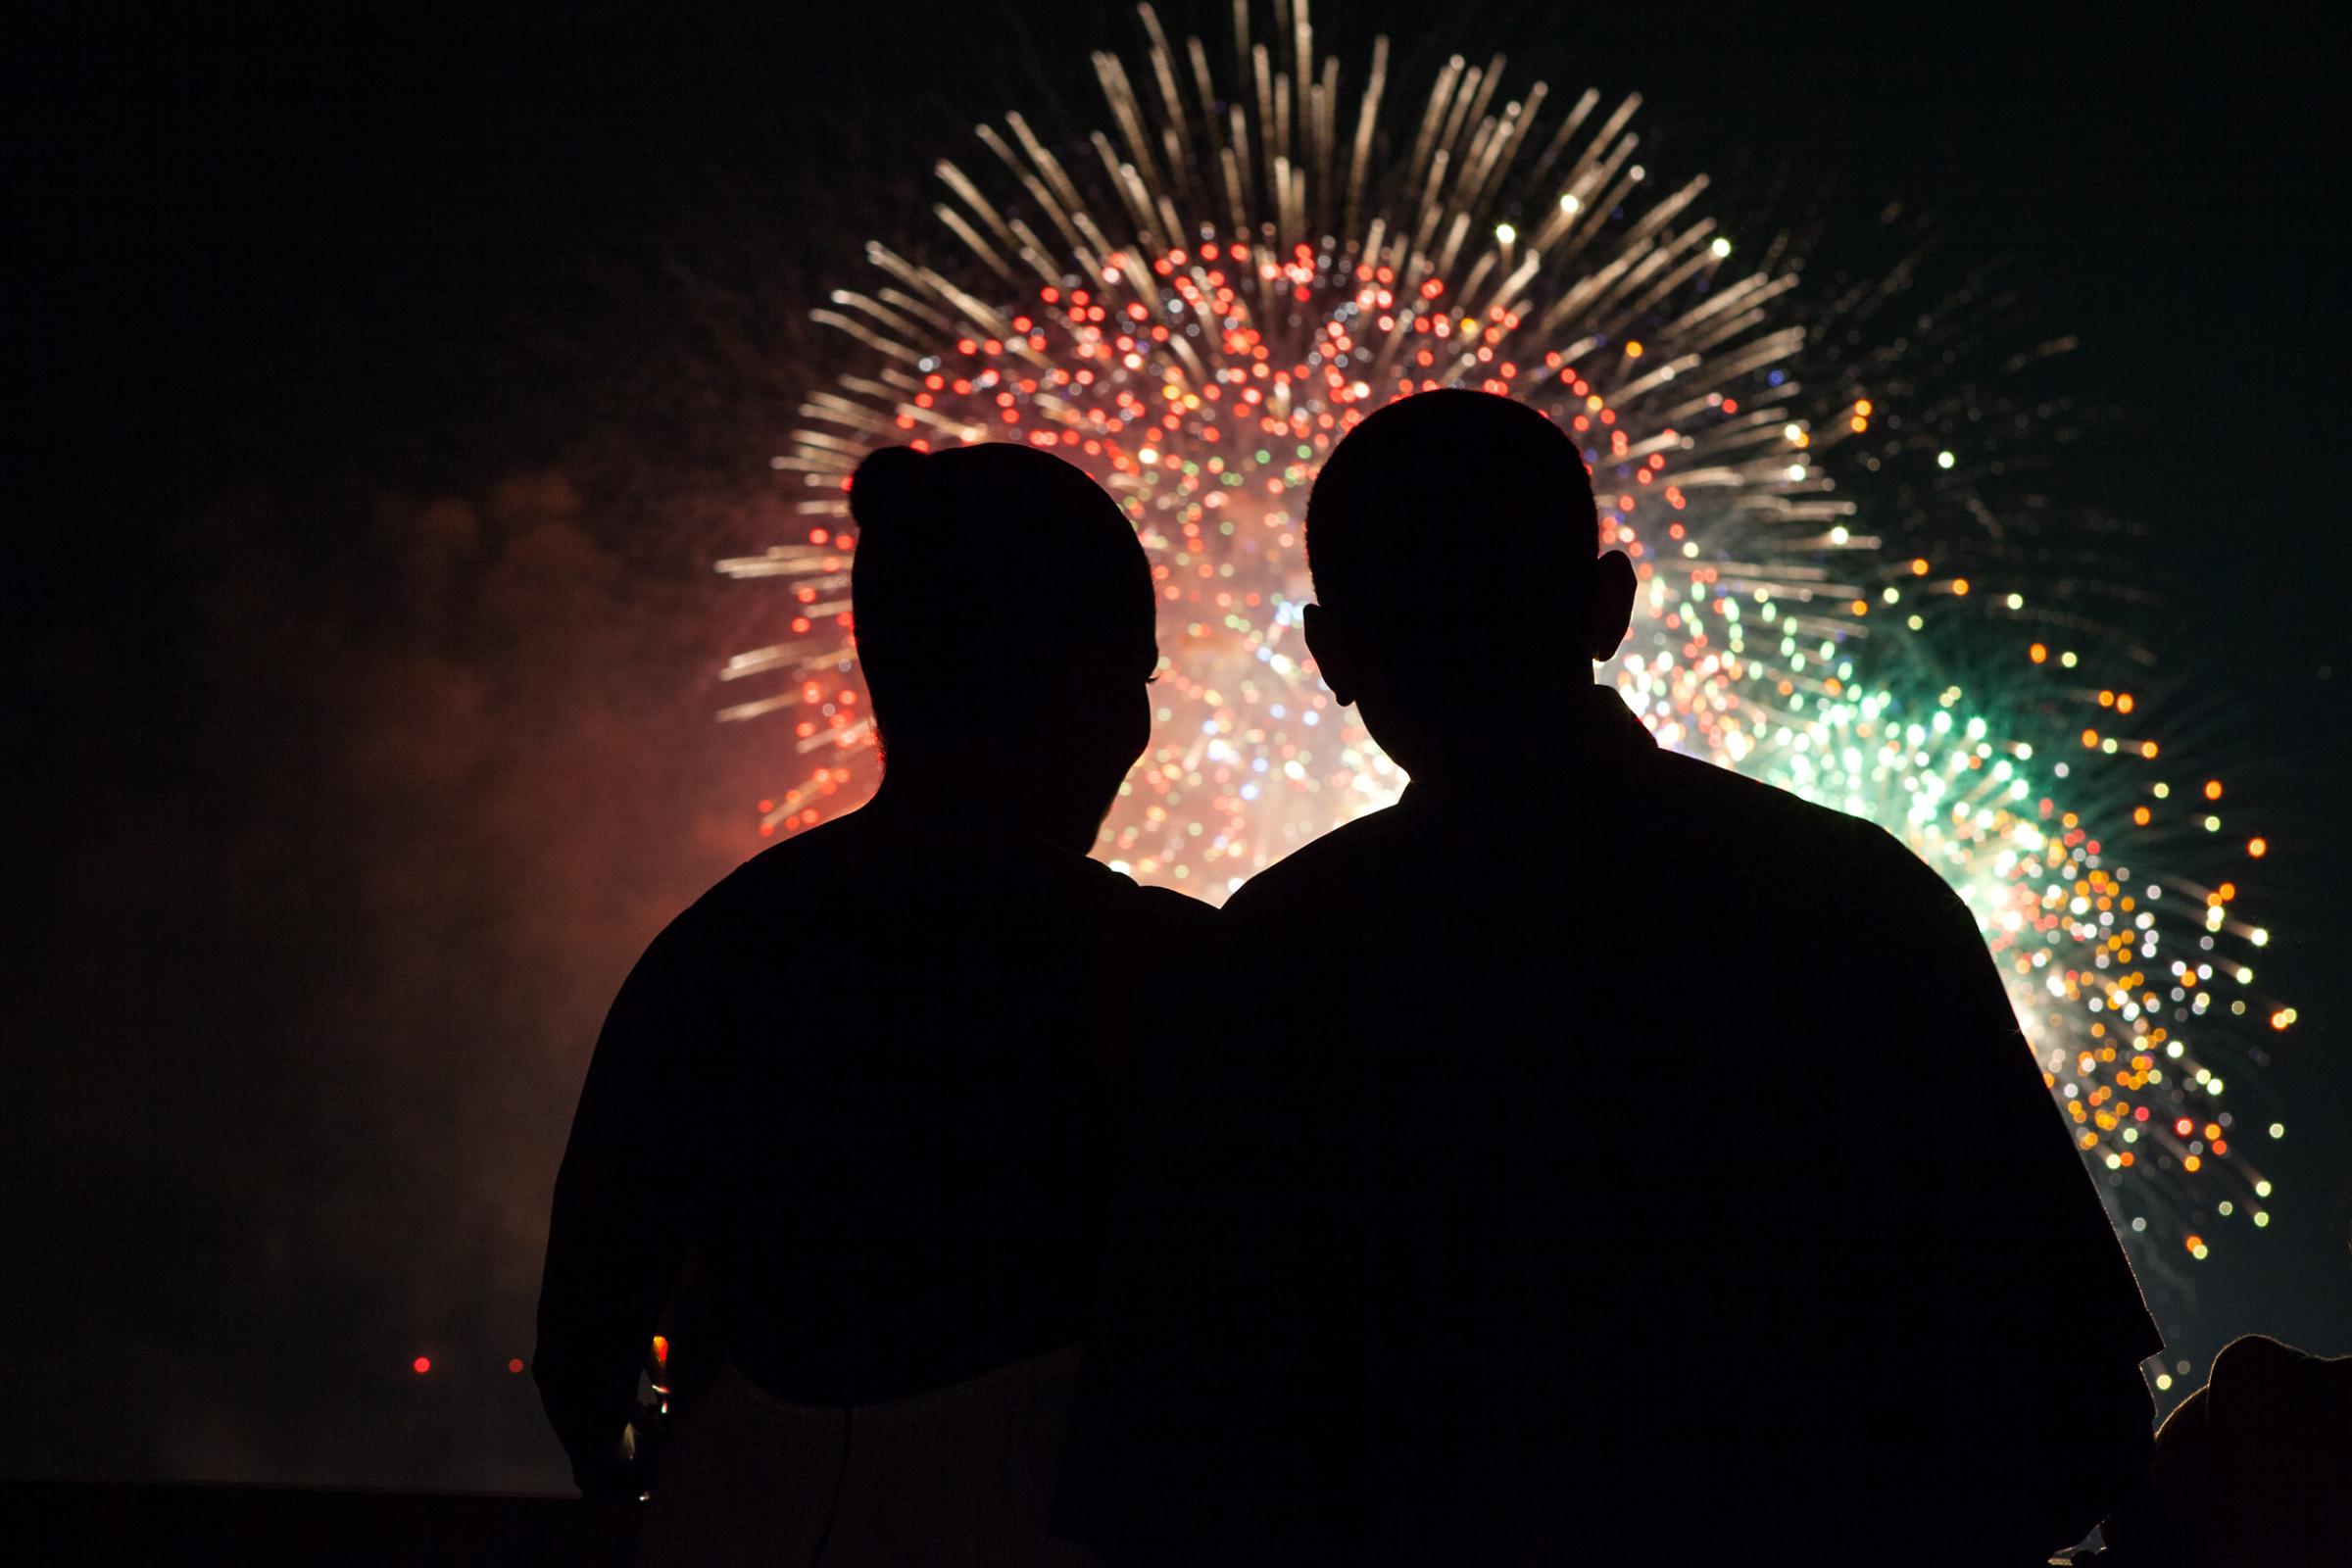 President Barack Obama and Michelle Obama watch 4th of July fireworks display from the roof of the White House on July 4, 2009. (Official White House photo by Pete Souza). Ordered.July 4, 2009“President and Mrs. Obama were watching the Fourth of July fireworks from the roof of the White House. What a great vantage point to not only see the fireworks, but also watch the Foo Fighters who were performing on the South Lawn.”(Official White House photo by Pete Souza)€